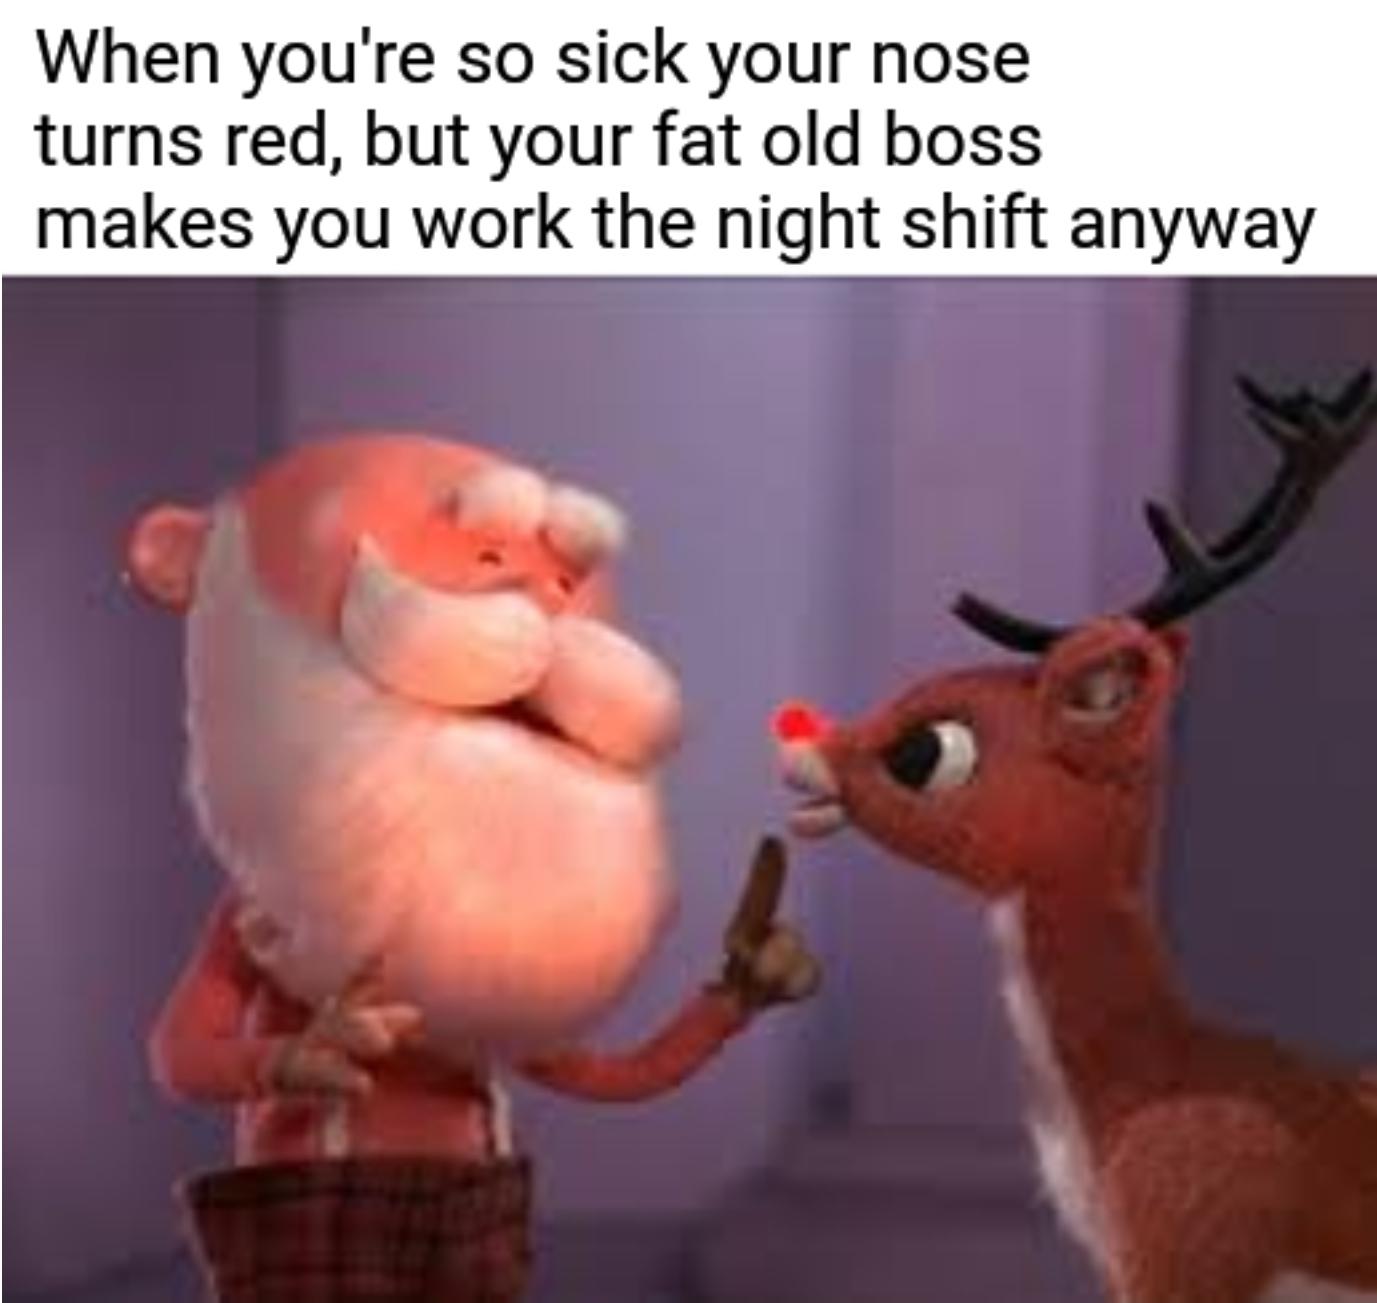 rudolph the red nosed reindeer meme - When you're so sick your nose turns red, but your fat old boss makes you work the night shift anyway